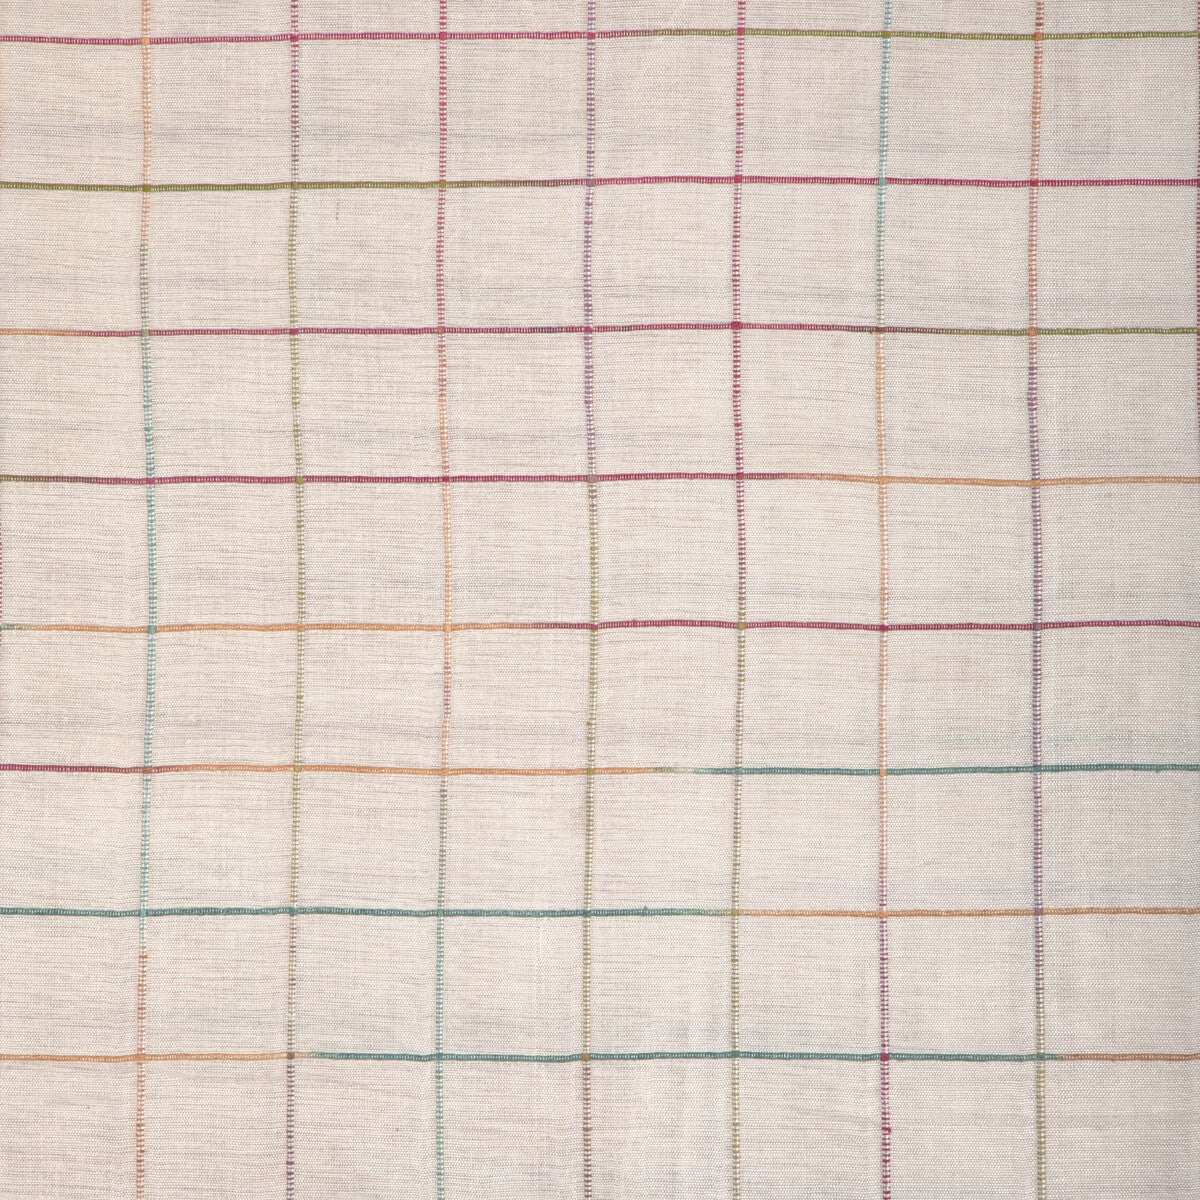 Moulin Check fabric in multi color - pattern 8023149.9175.0 - by Brunschwig &amp; Fils in the Vienne Silks collection